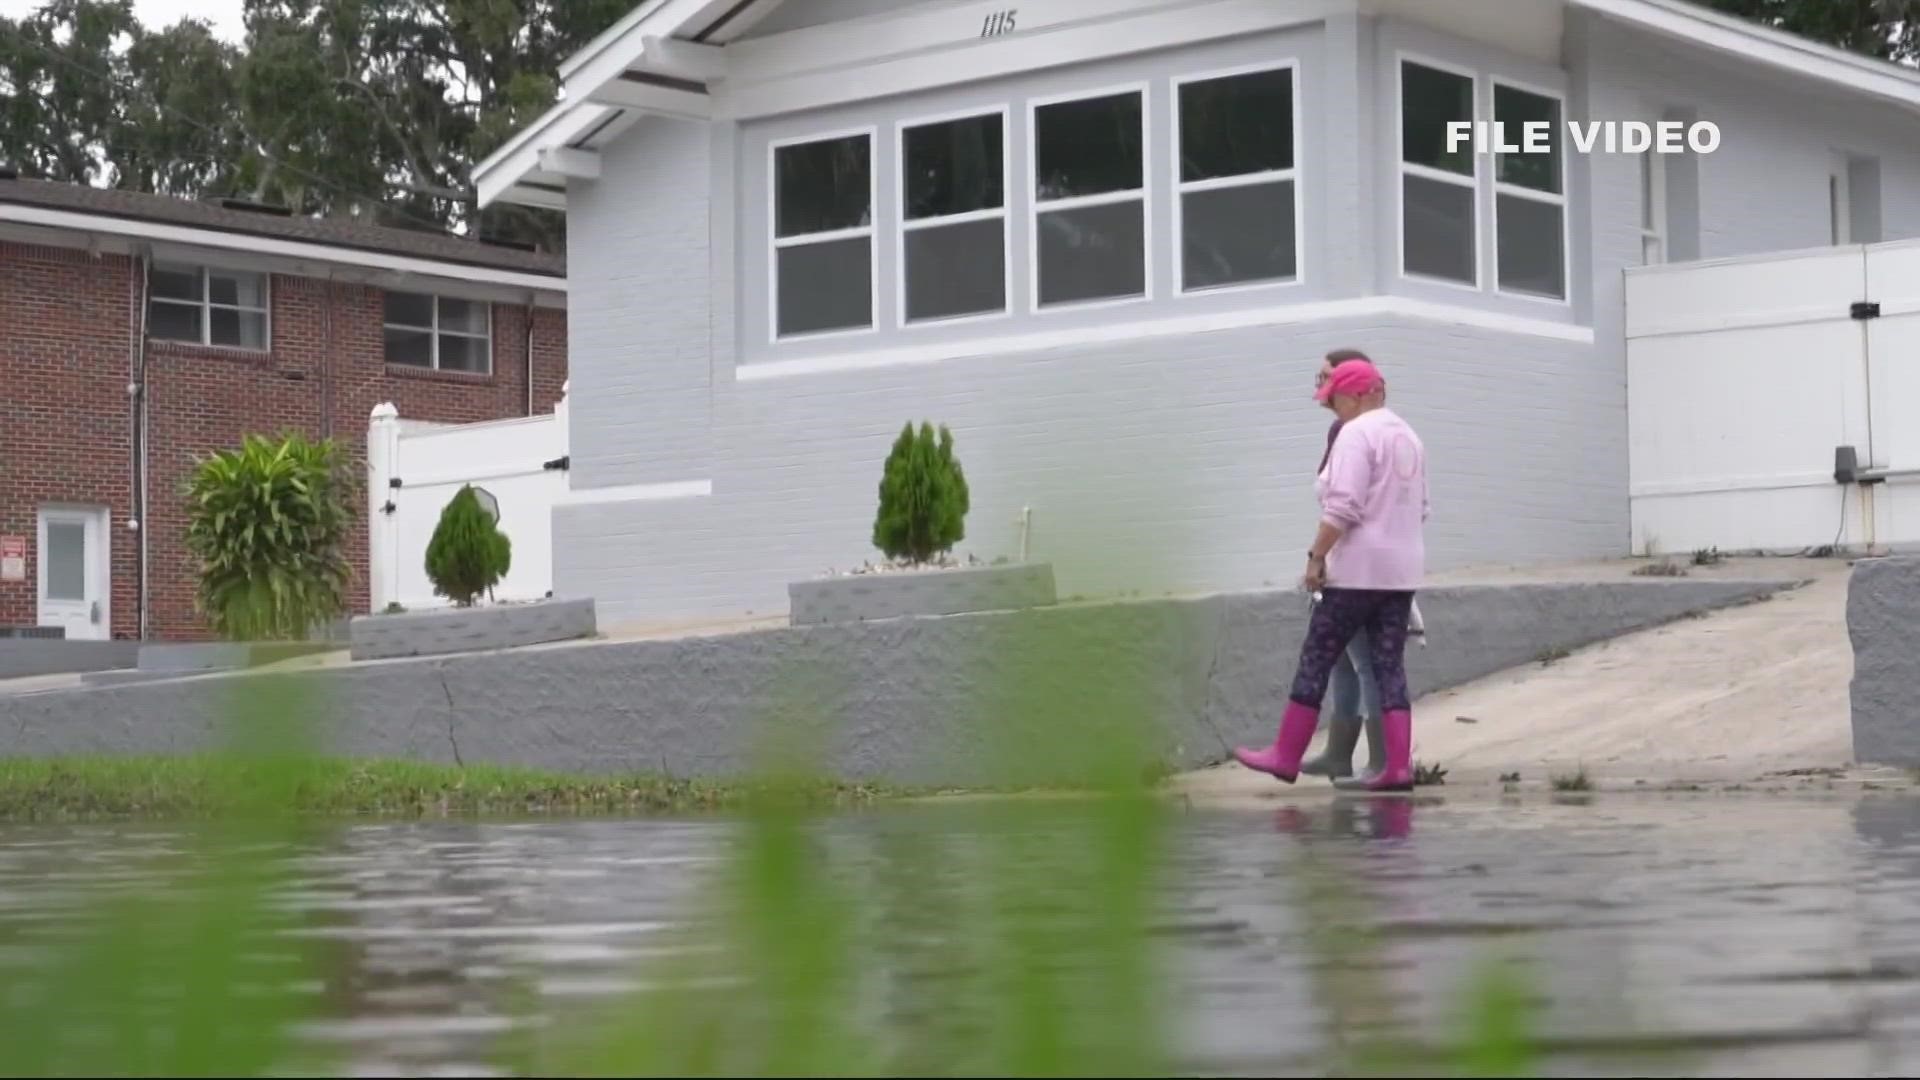 Flooding has been an ongoing issue in San Marco for years.